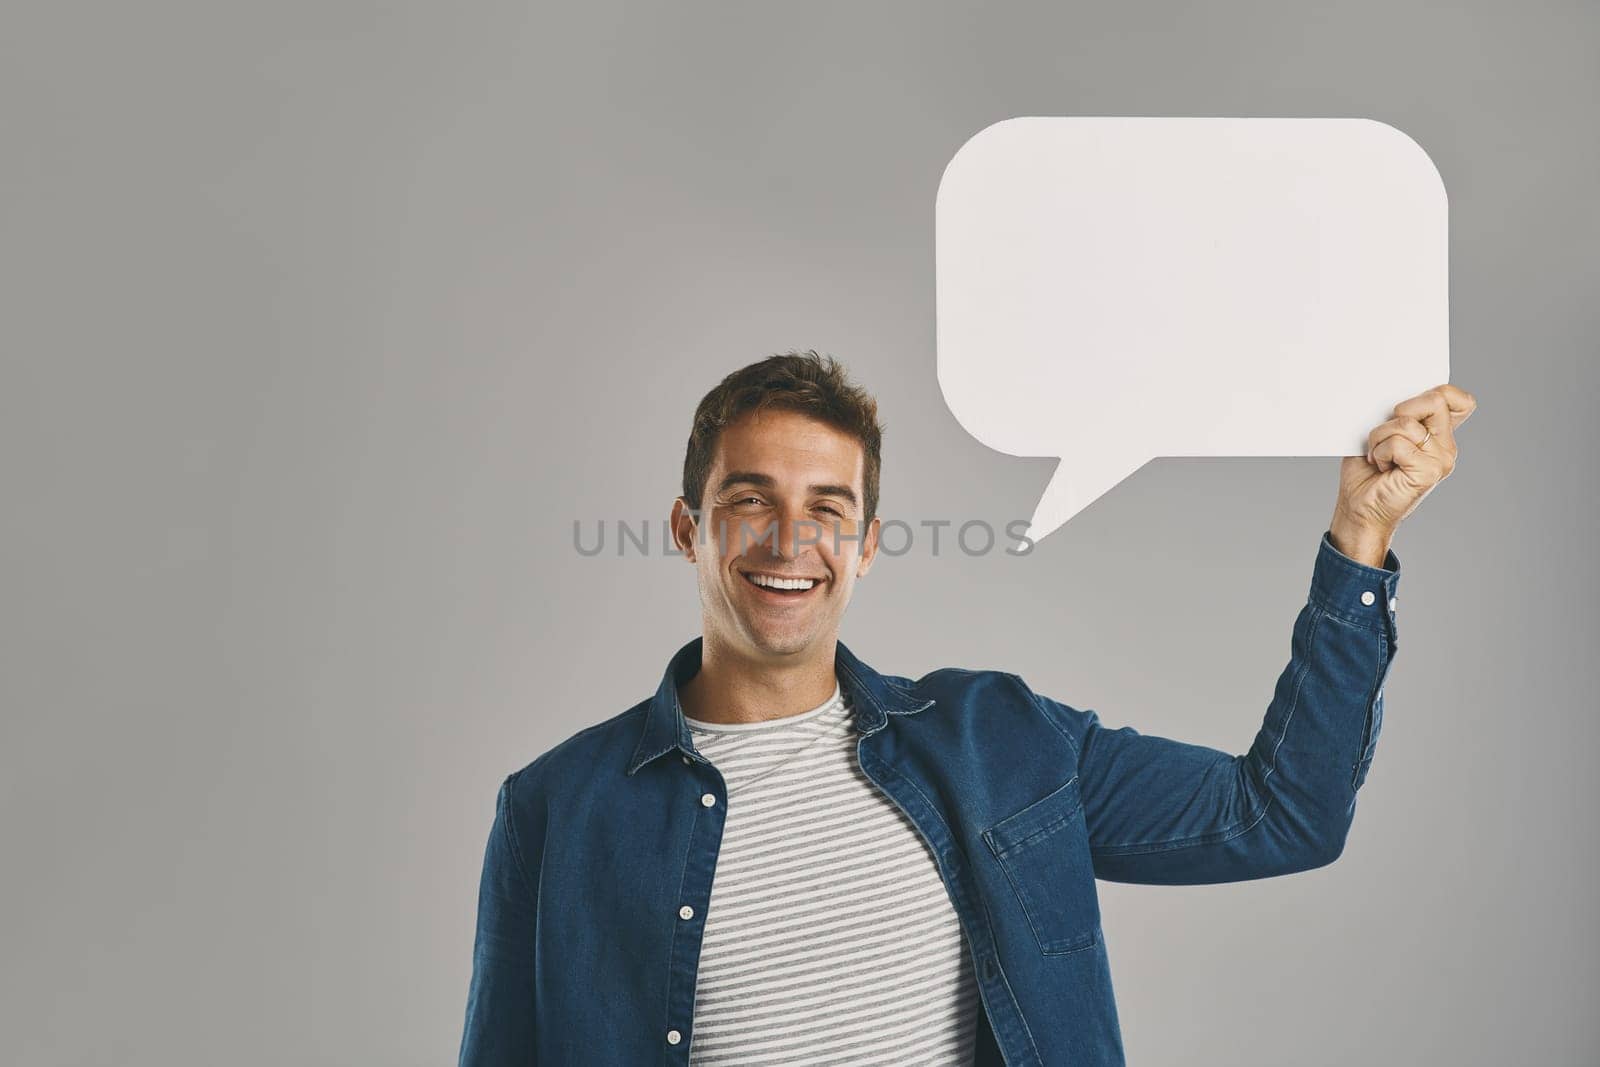 Speak your mind. Studio portrait of a young man holding a speech bubble against a grey background. by YuriArcurs